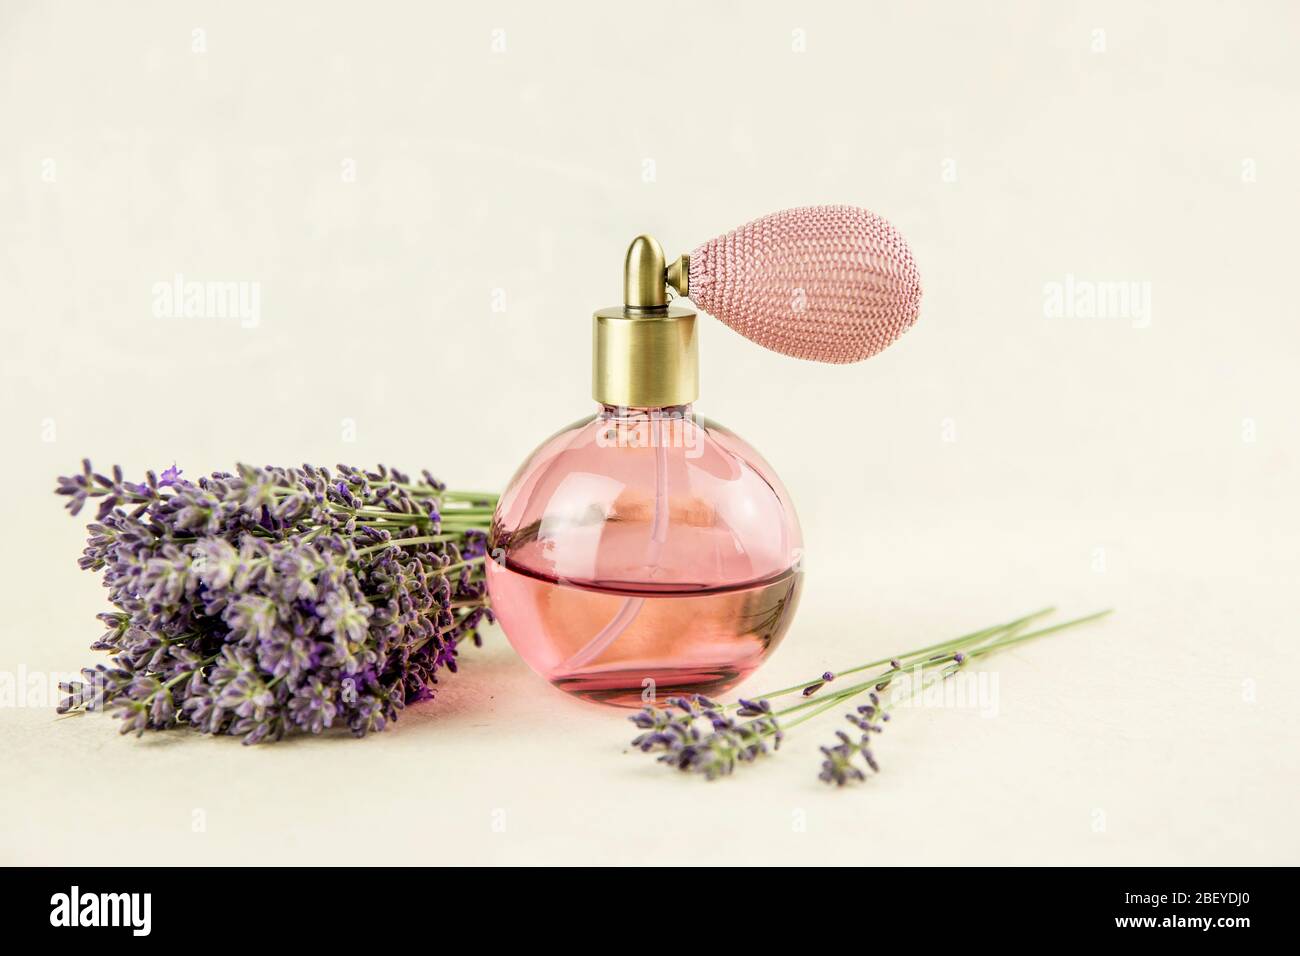 Vintage perfume bottle with lavender aroma. Lavender calming aroma scent concept on light beige background with fresh lavender bouquet. Stock Photo